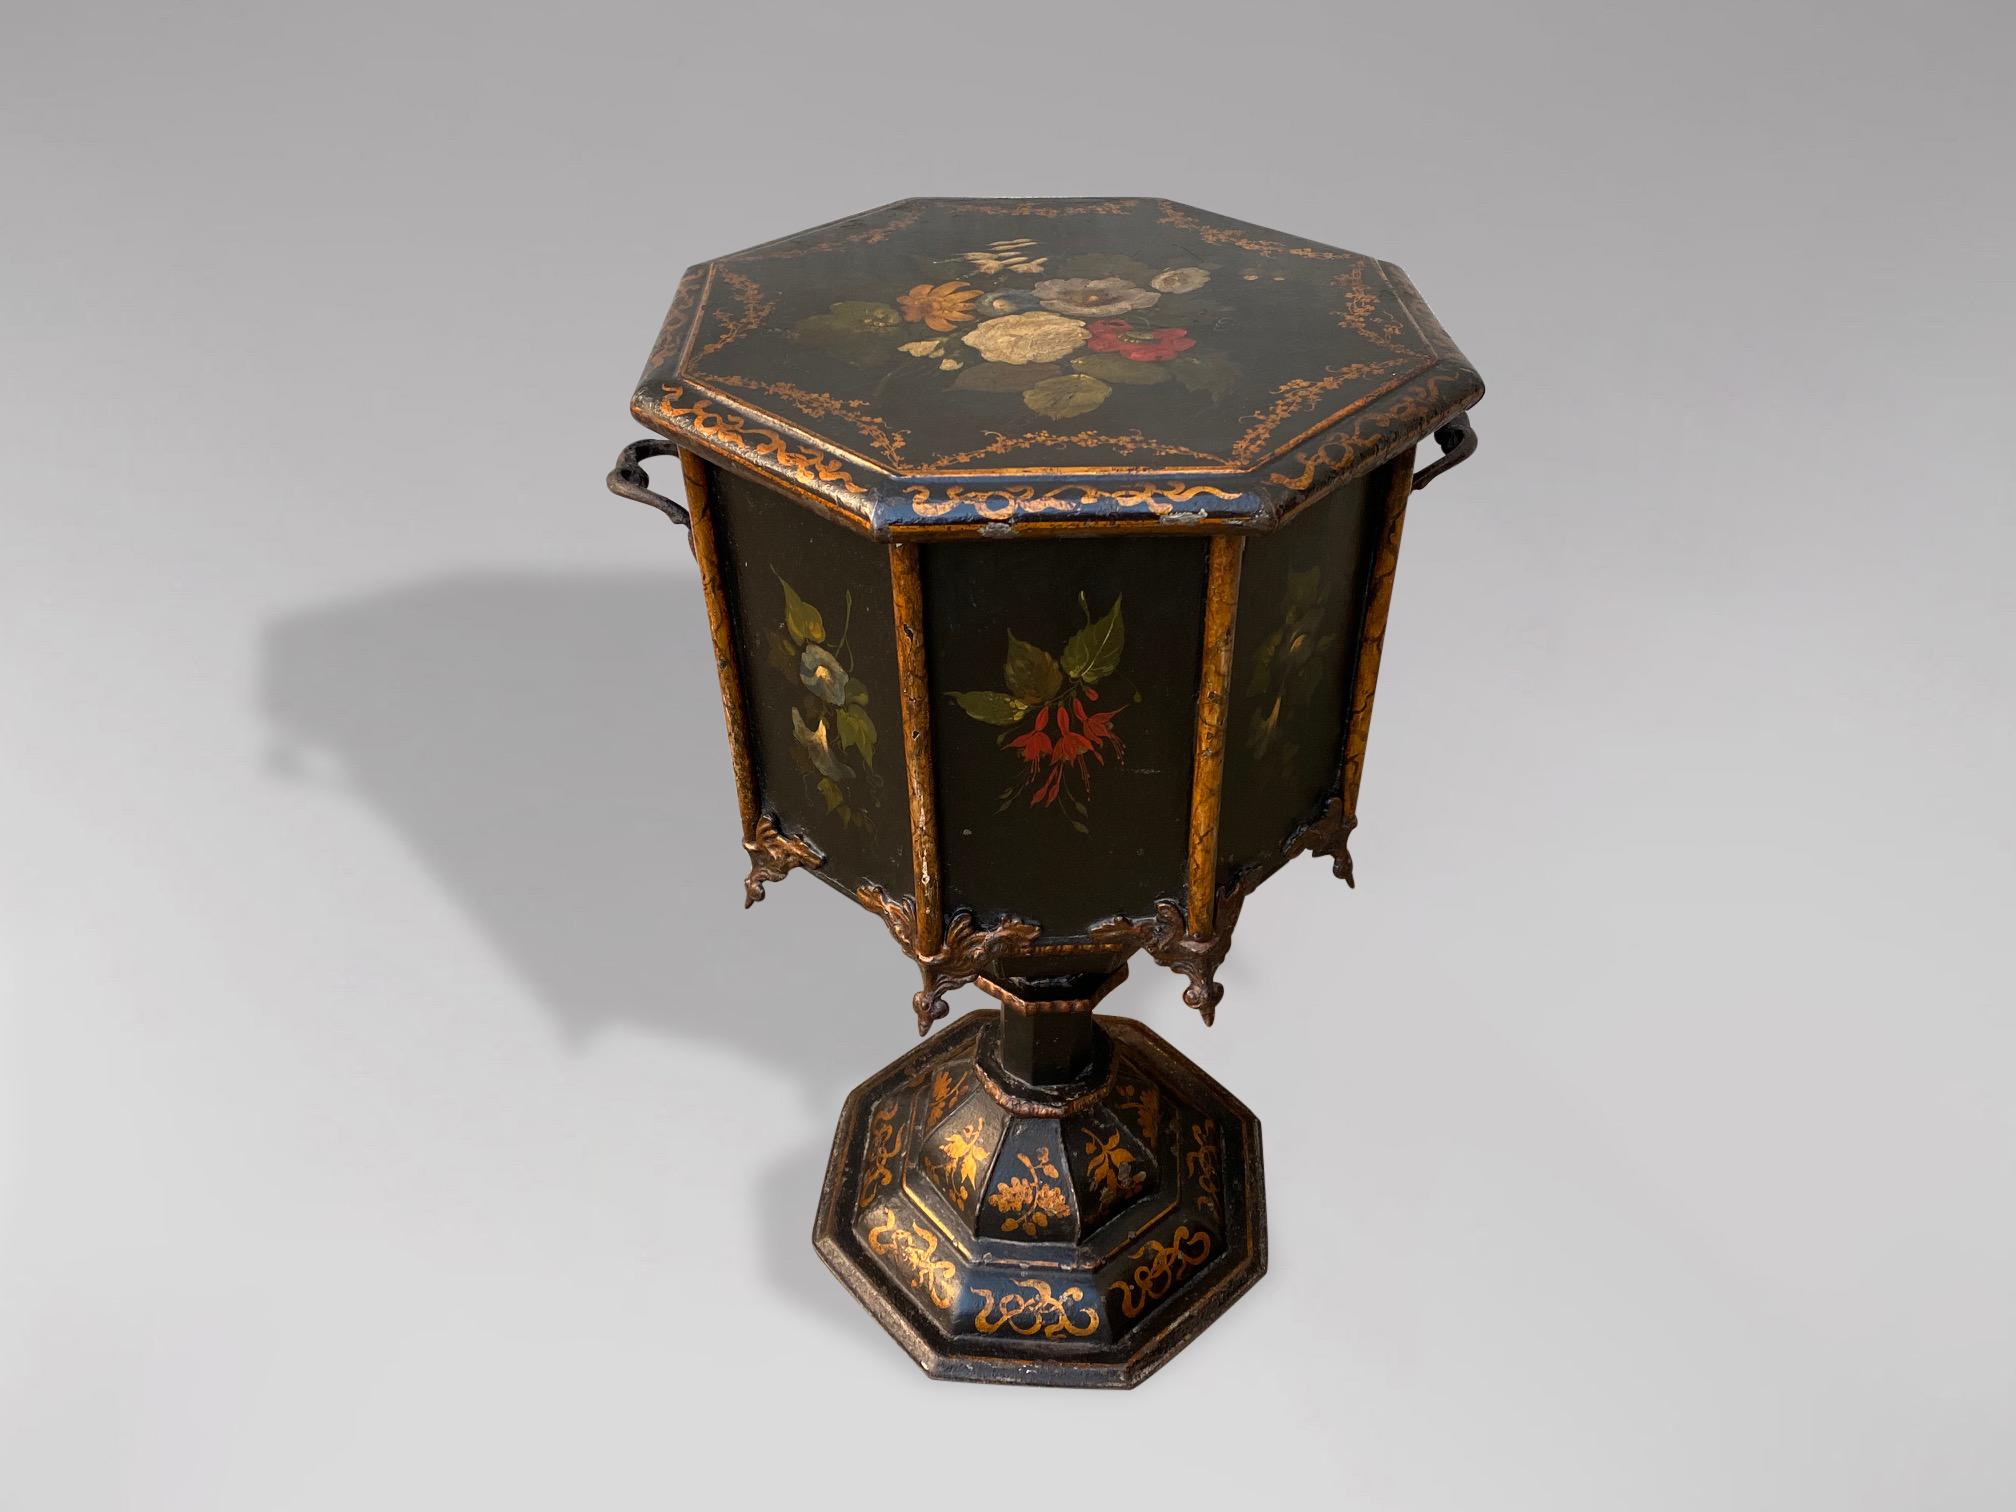 A stunning 19th century black painted octagonal English tole coal hod or scuttle with hinged lid. The entire box is painted in a glossy black and the top and front are decorated with hand painted floral motifs within a raised border with fine gold